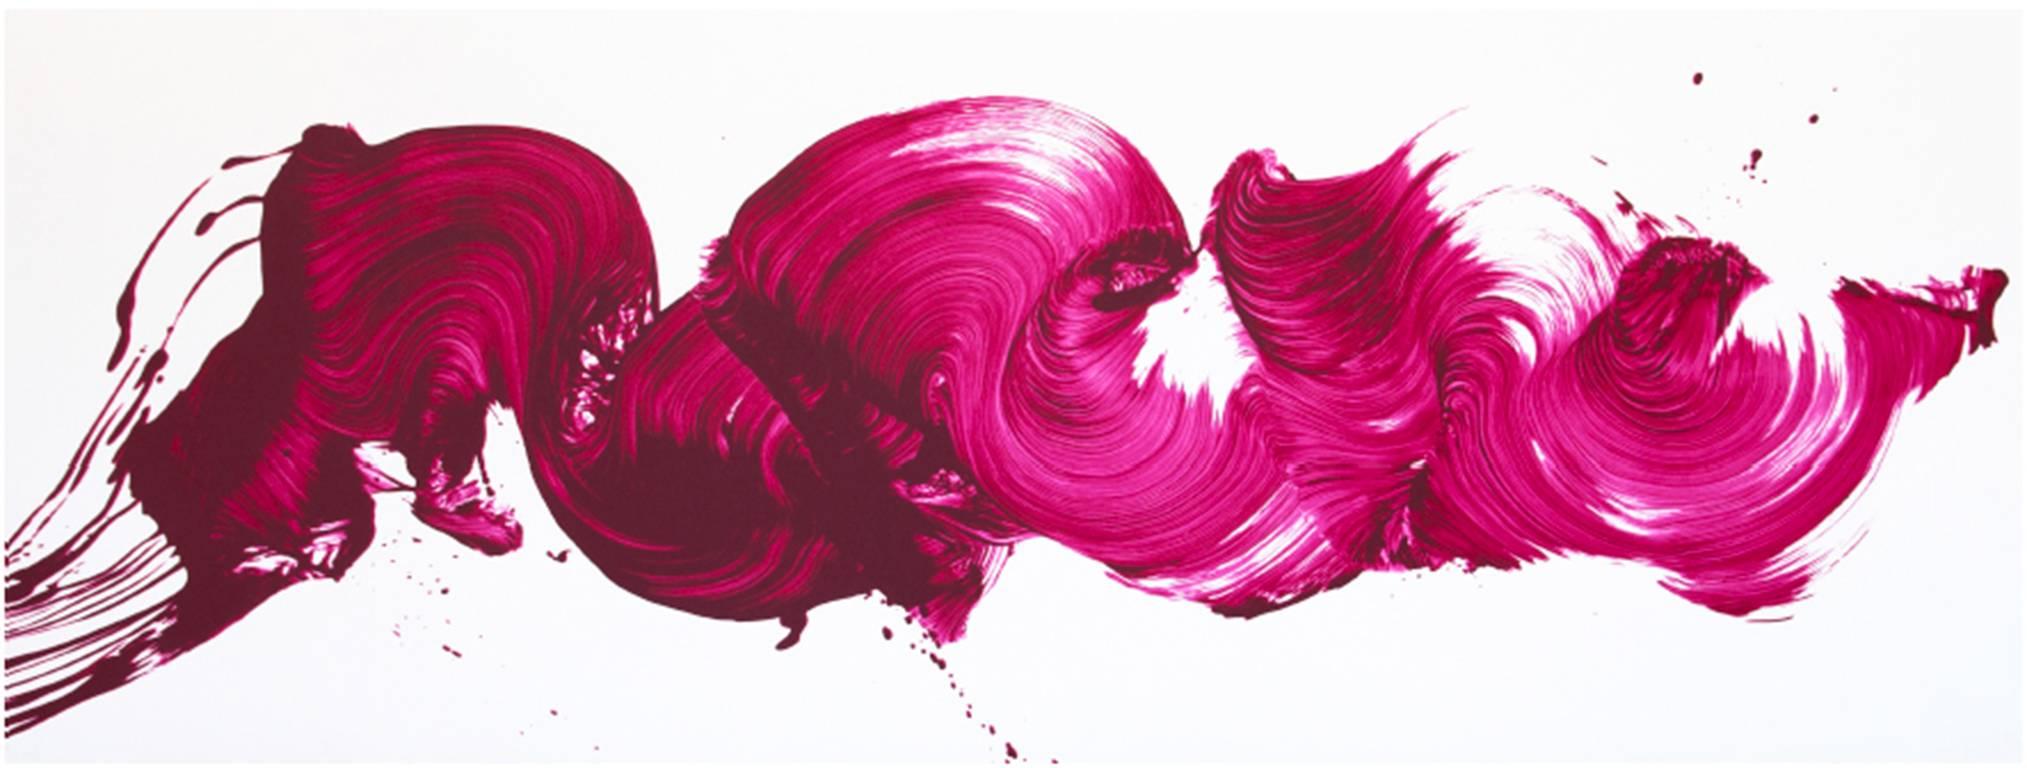 James Nares Abstract Print - Girl About Town